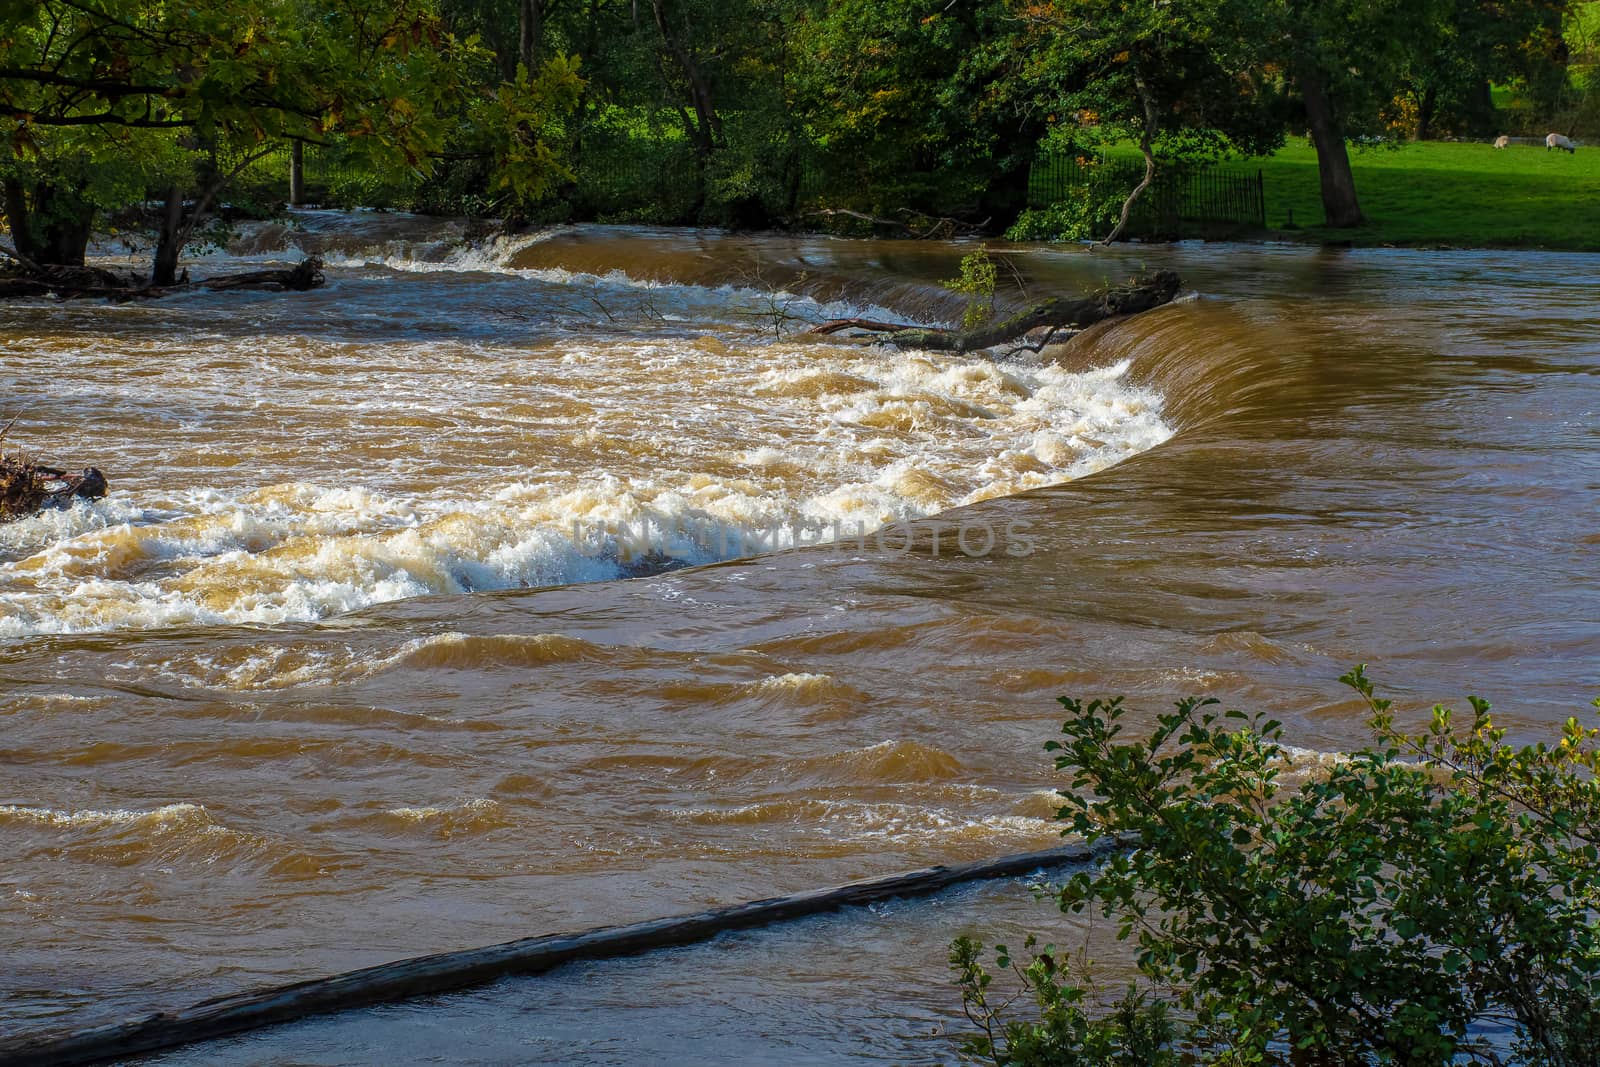 Swollen river after heavy rain causing rapids as it passes over the horseshoe falls